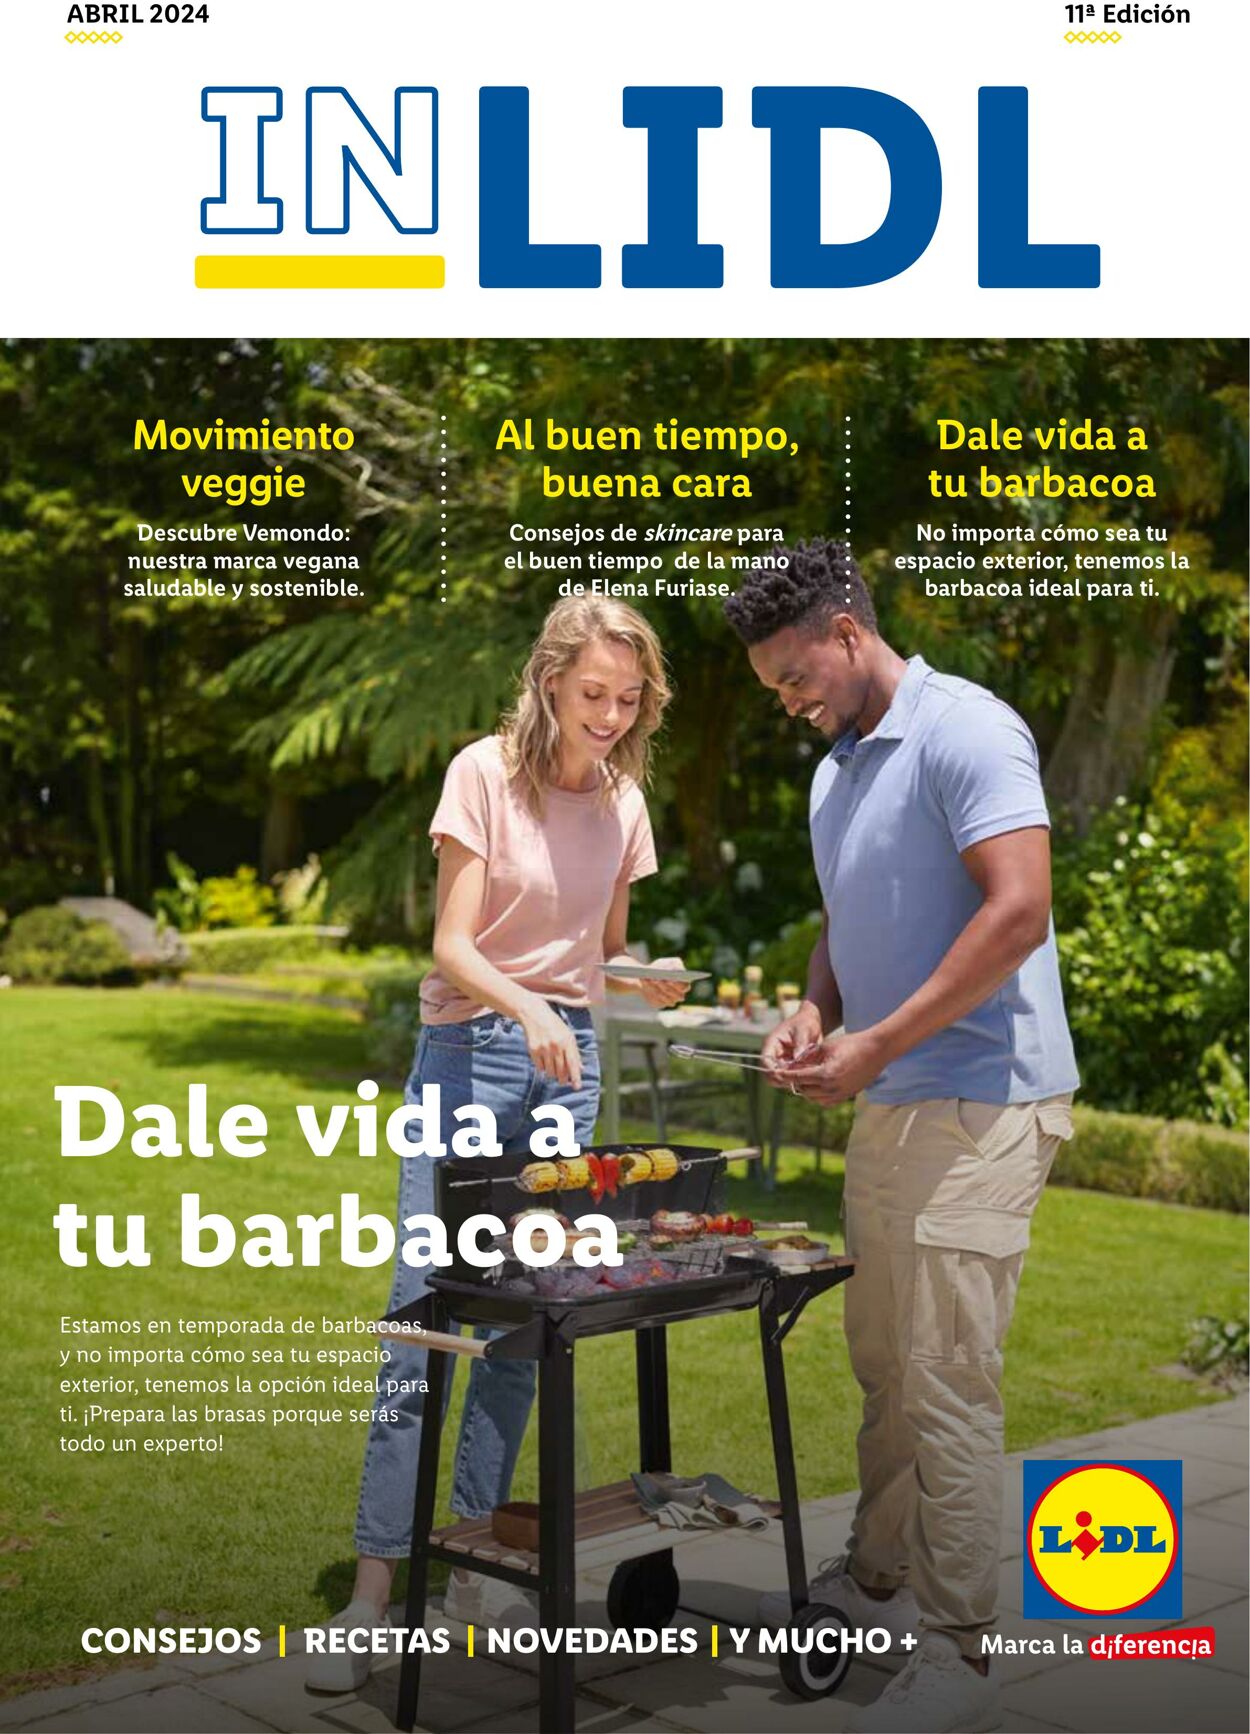 Folleto Lidl - REVISTA INLIDL ABRIL 1 abr., 2024 - 1 may., 2024